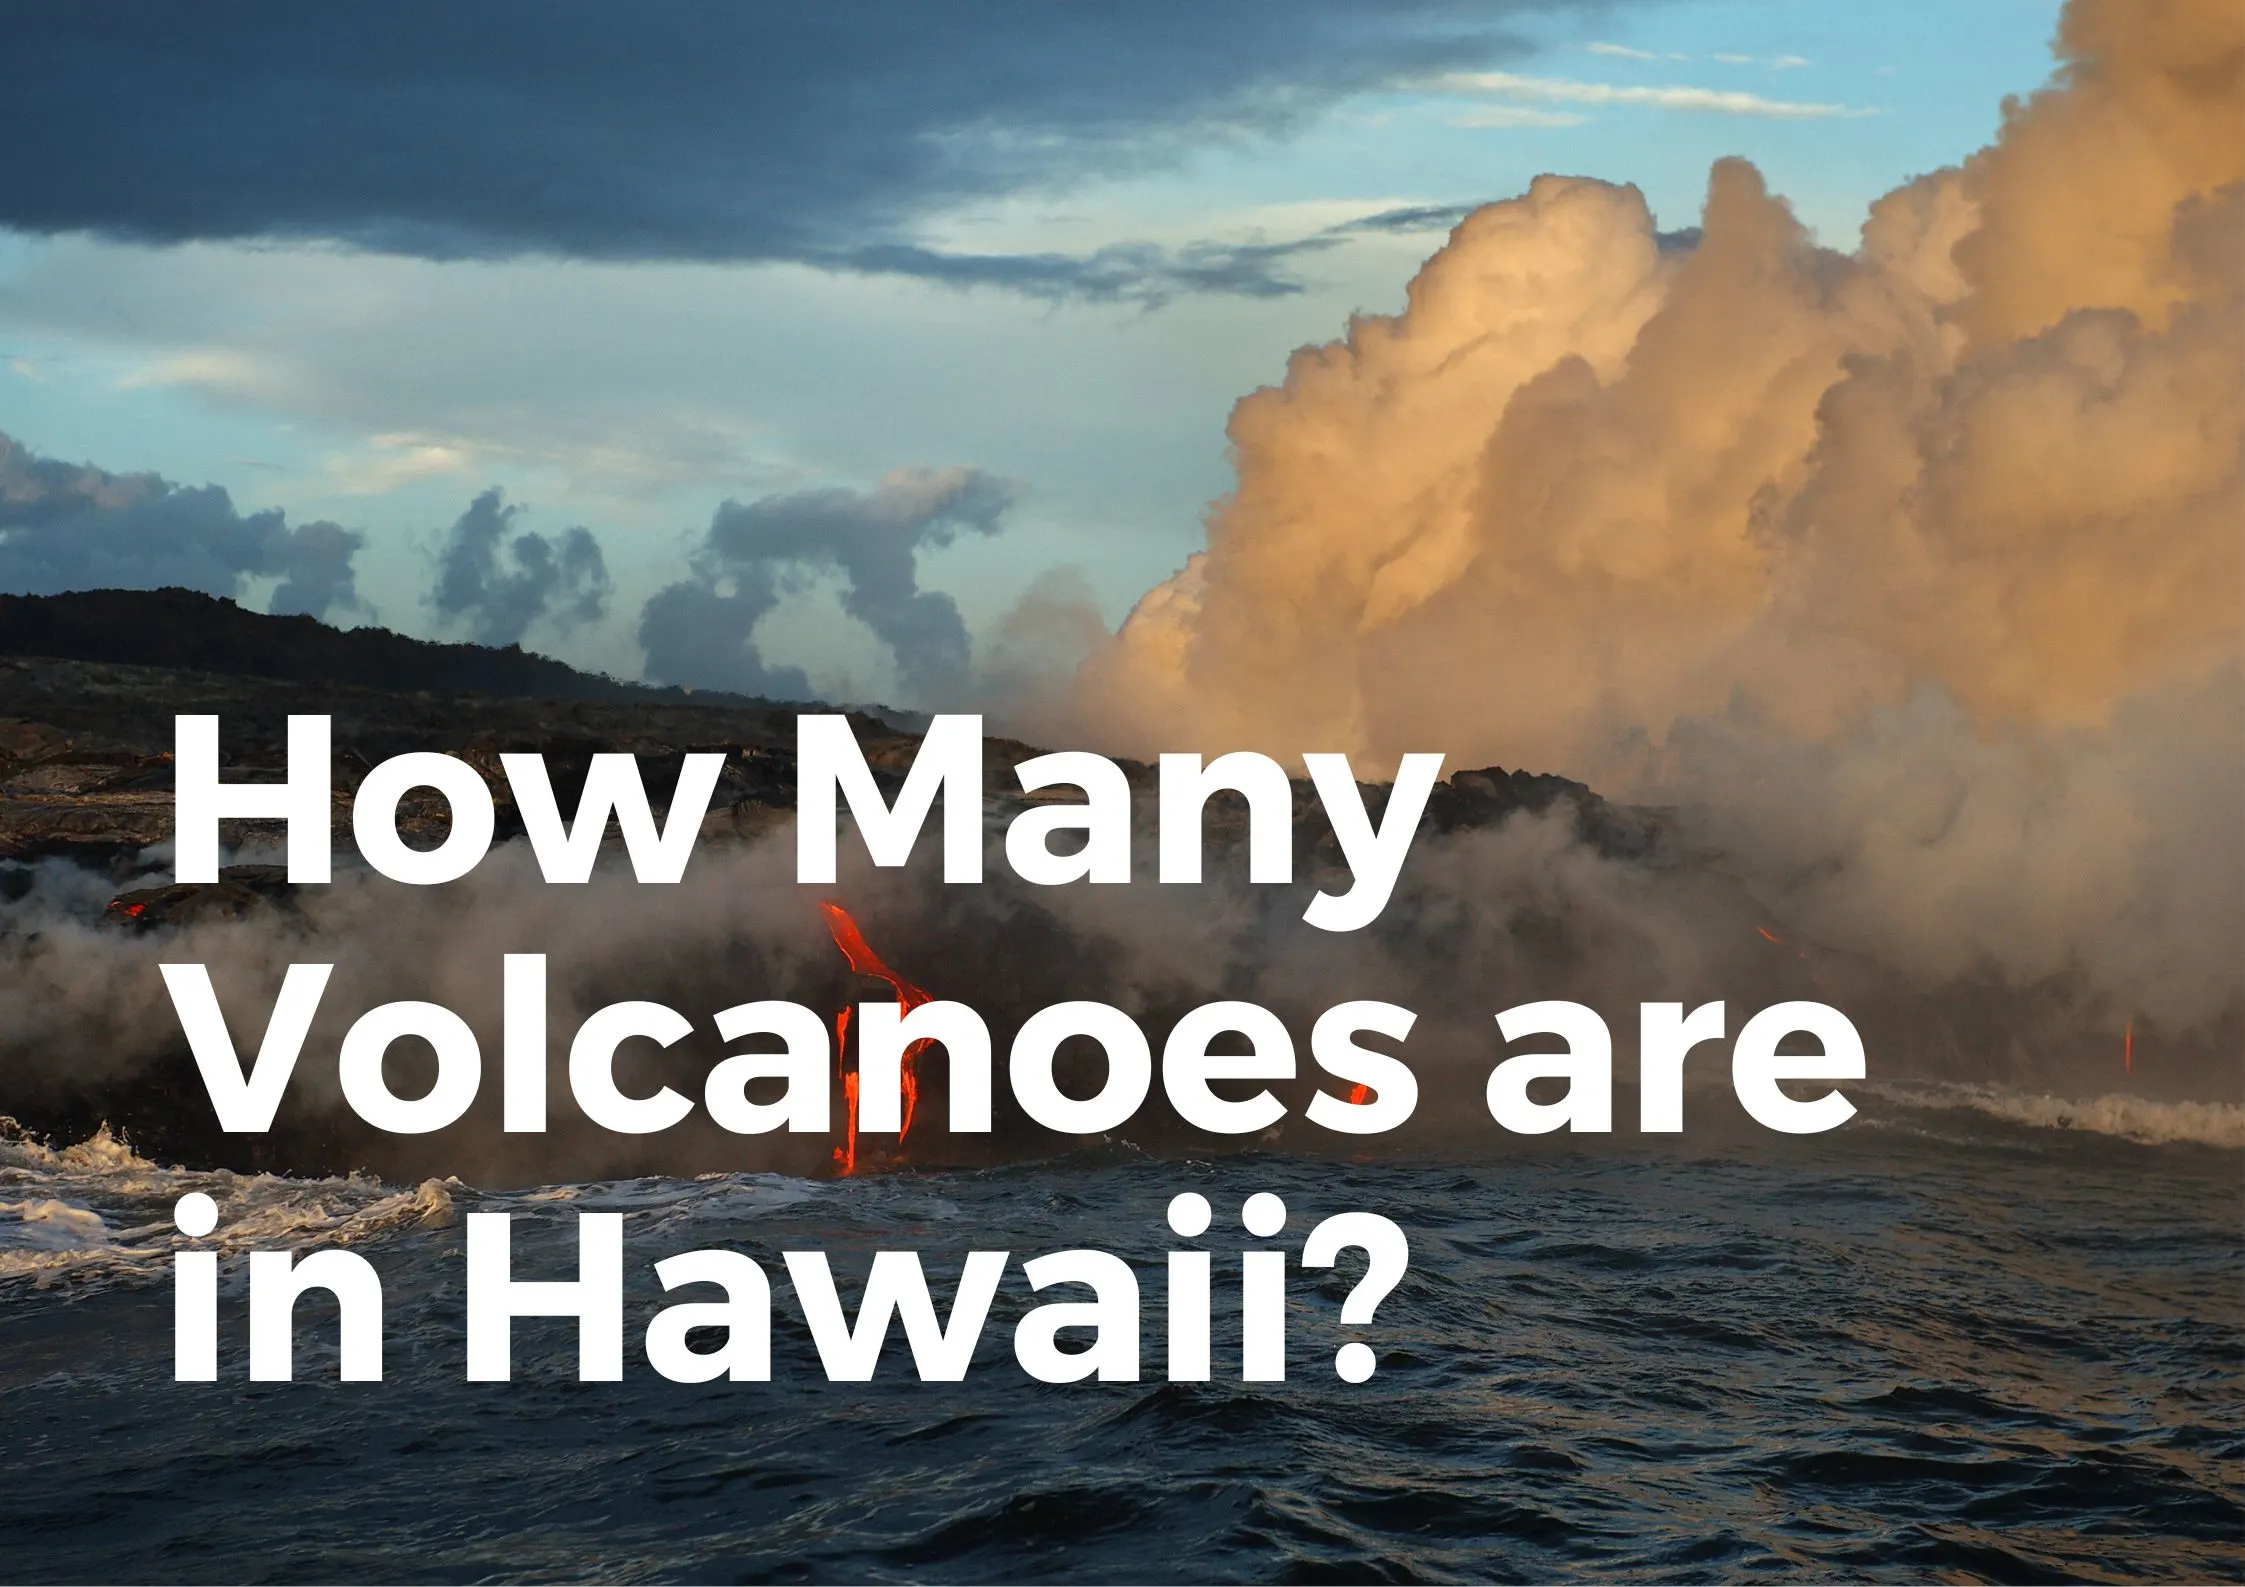 How many volcanoes are in hawaii